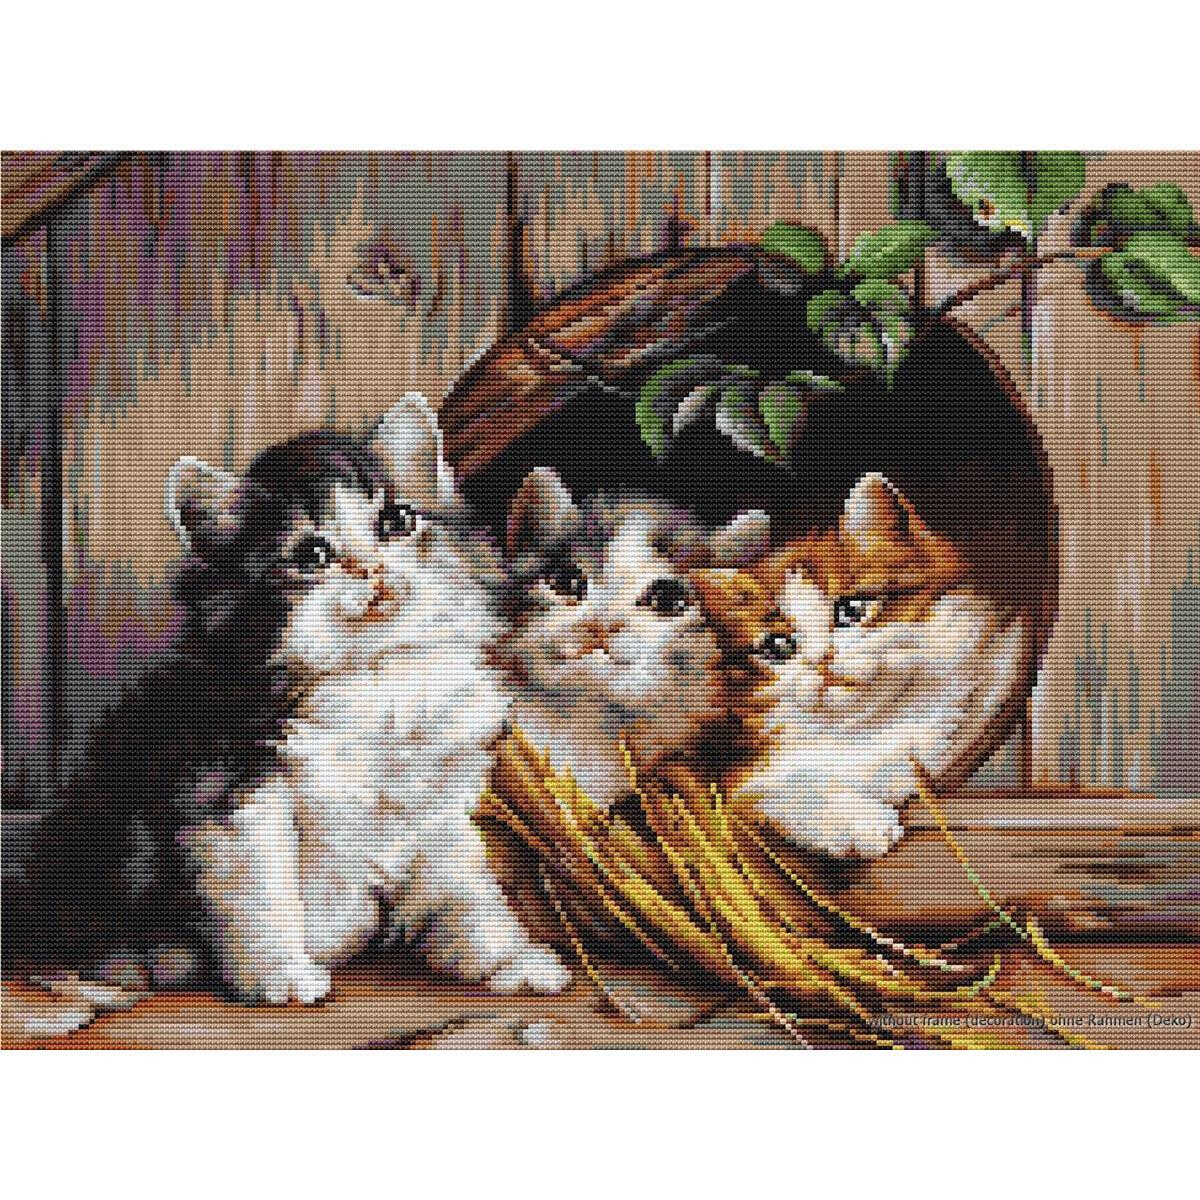 Three kittens with fur patterns in black, gray and white...